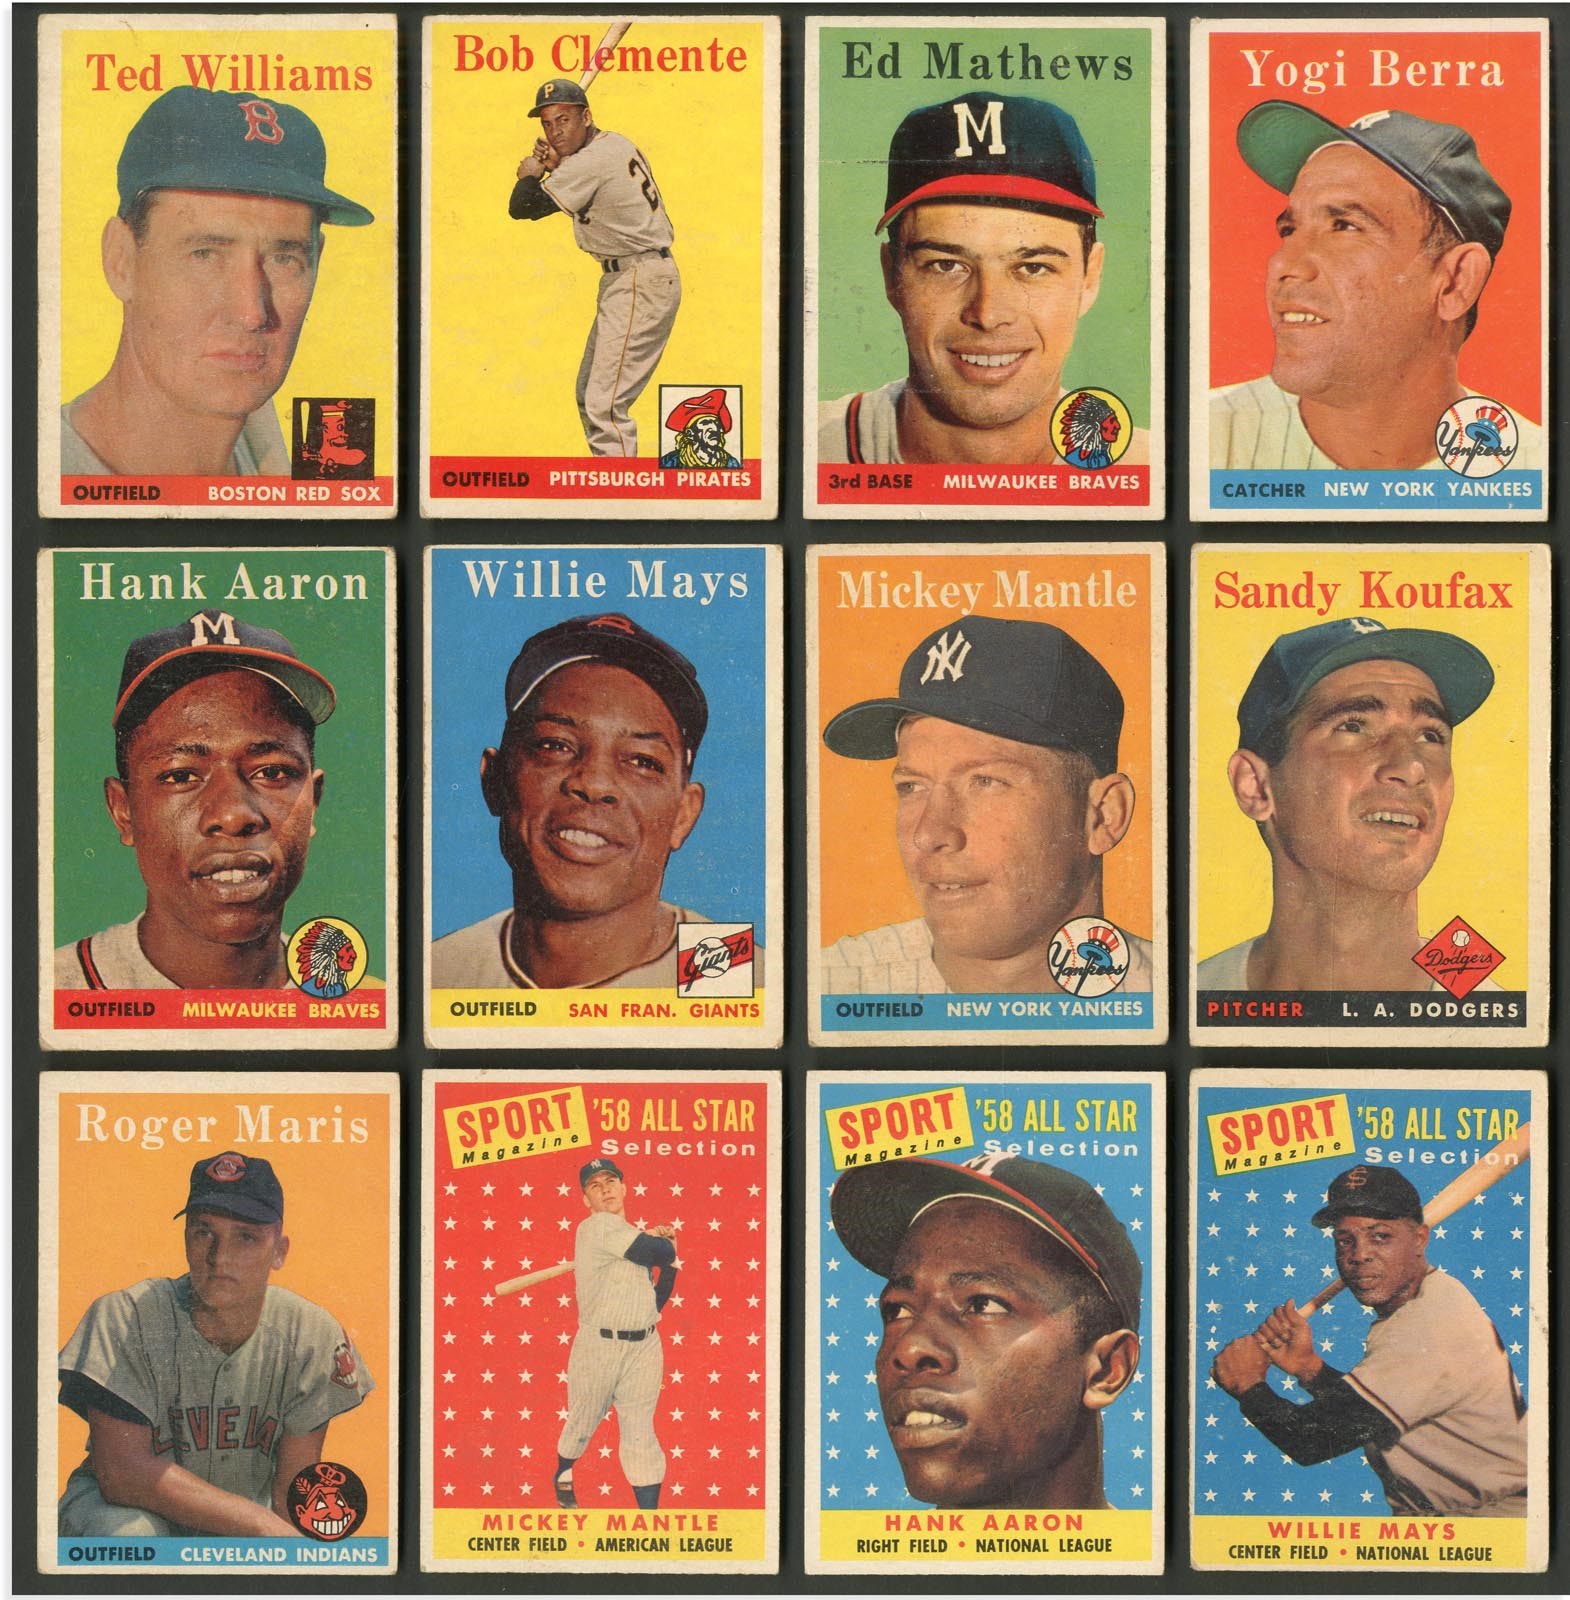 1958 Topps Near Complete Set with Stars - Mantle, Aaron, Clemente, Williams, Koufax (440+)